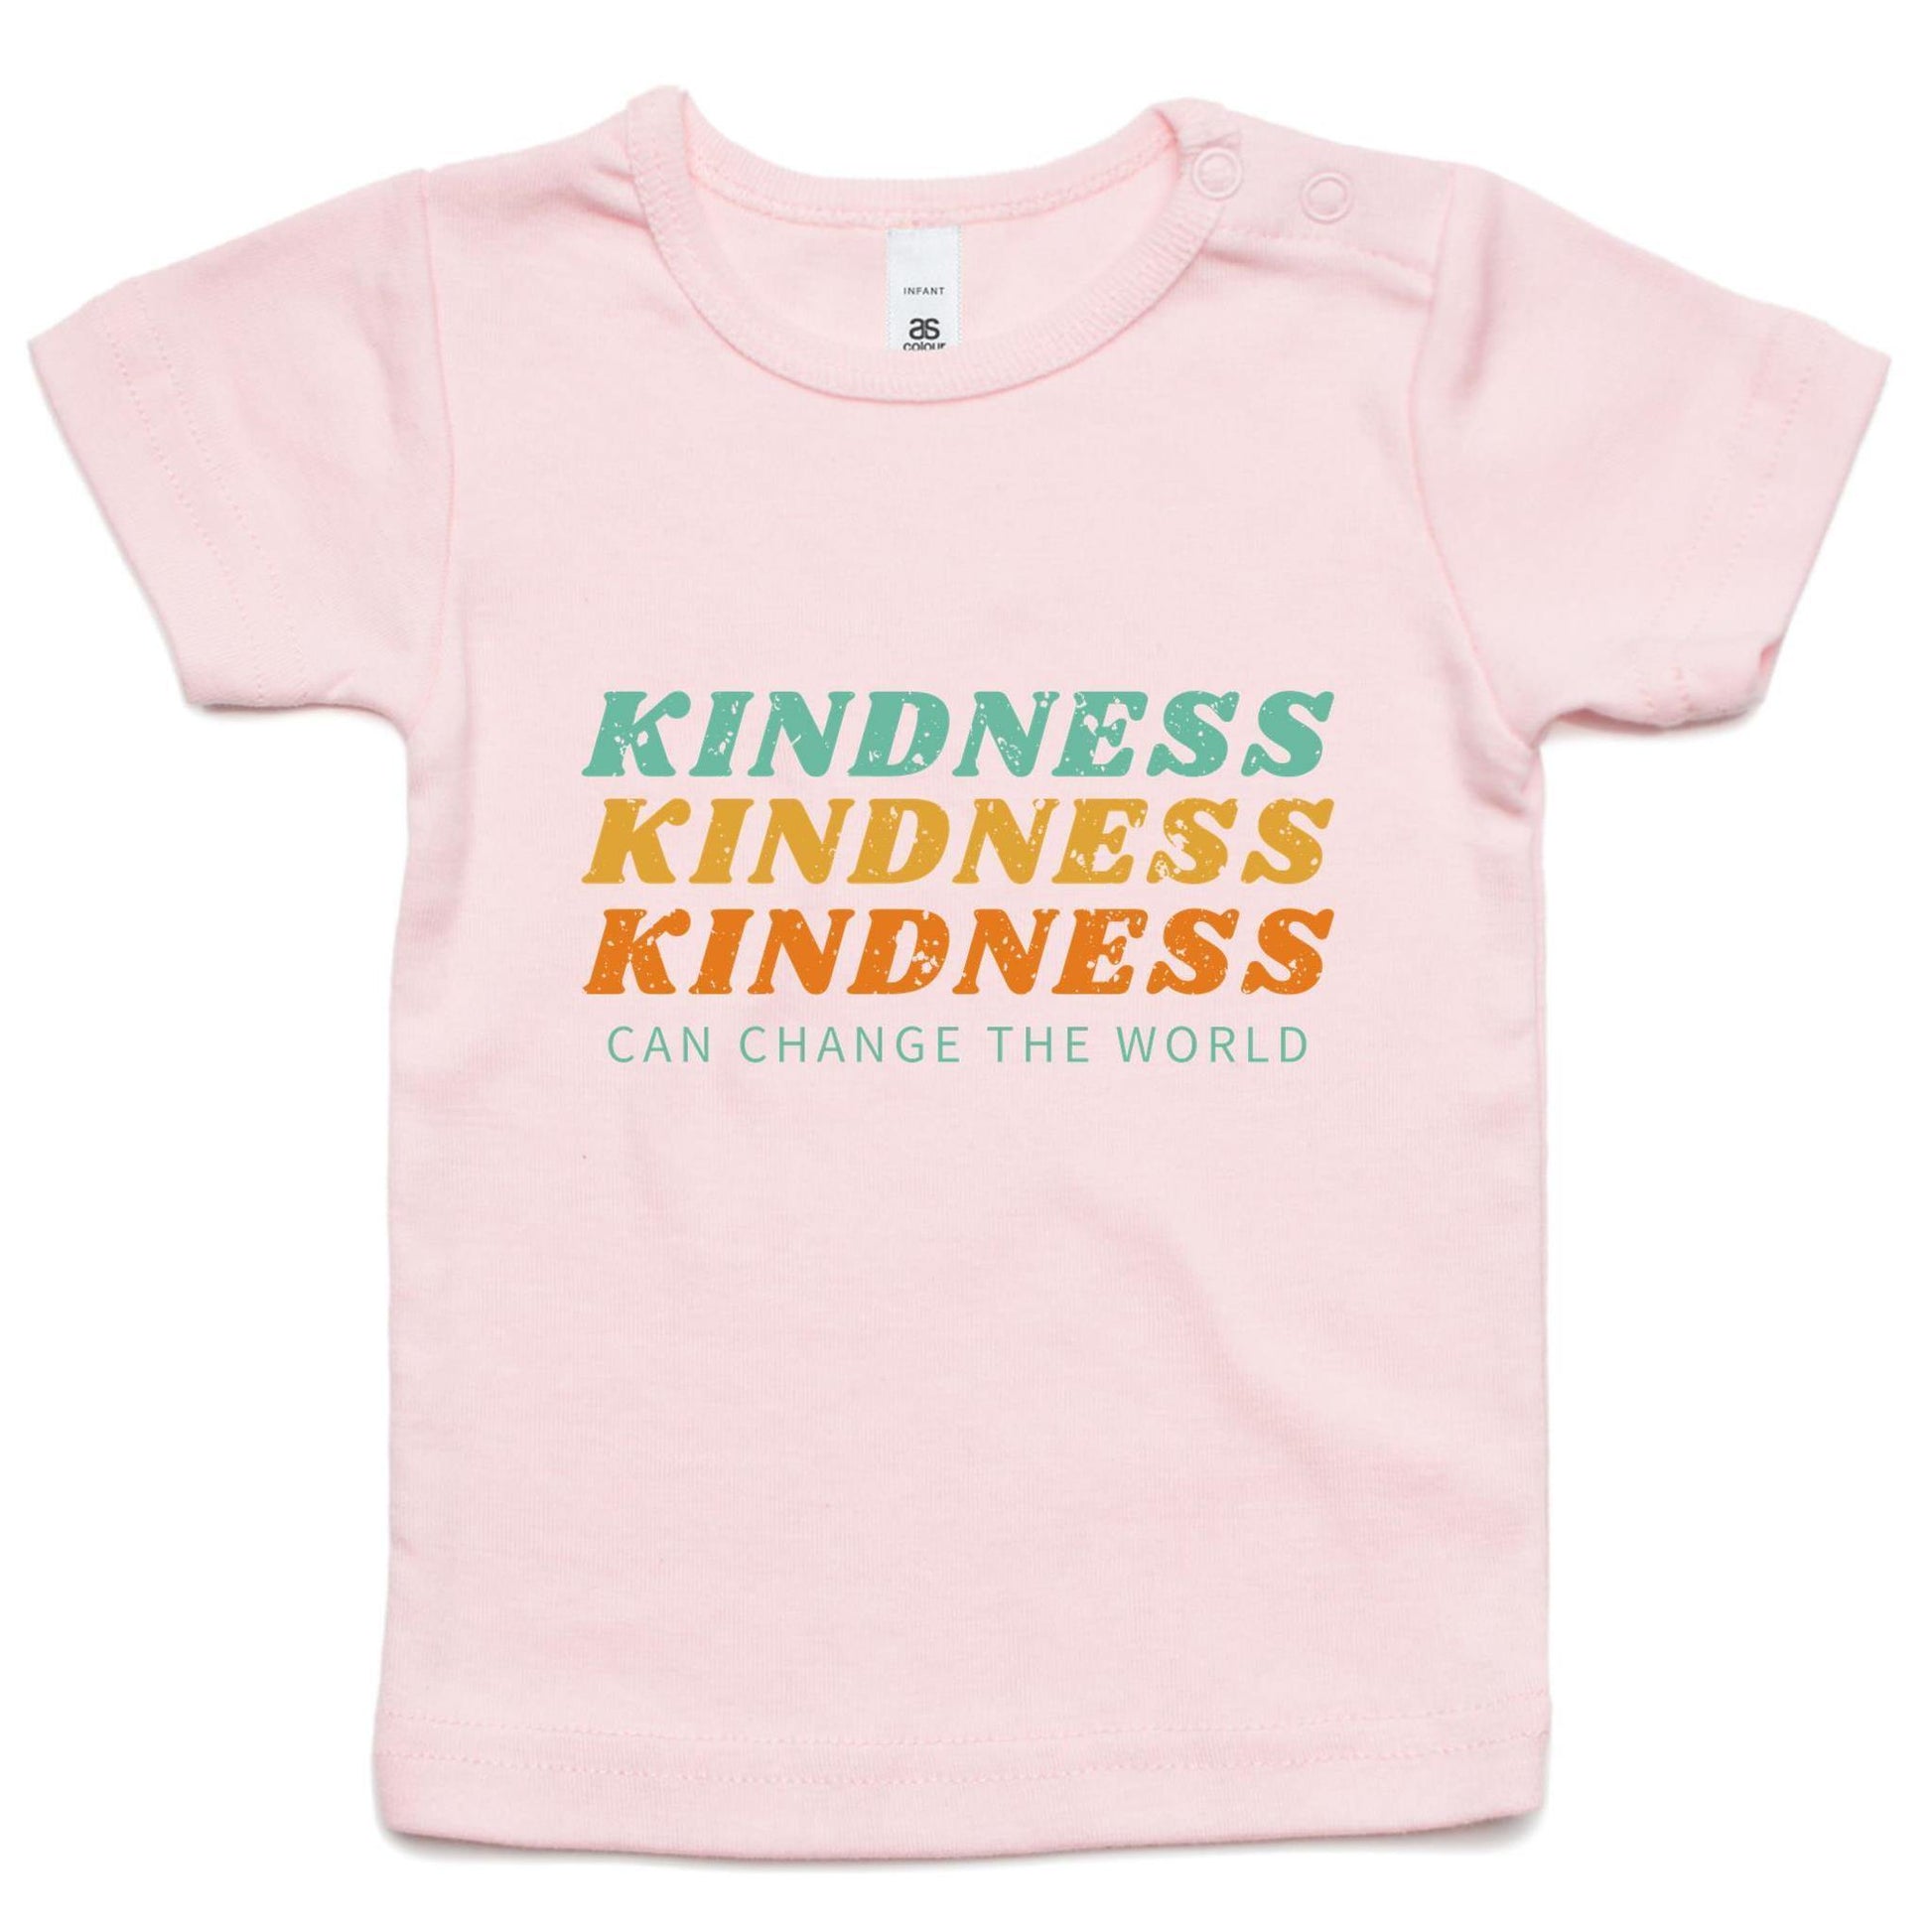 Kindness Can Change The World - Baby T-shirt Pink Baby T-shirt kids